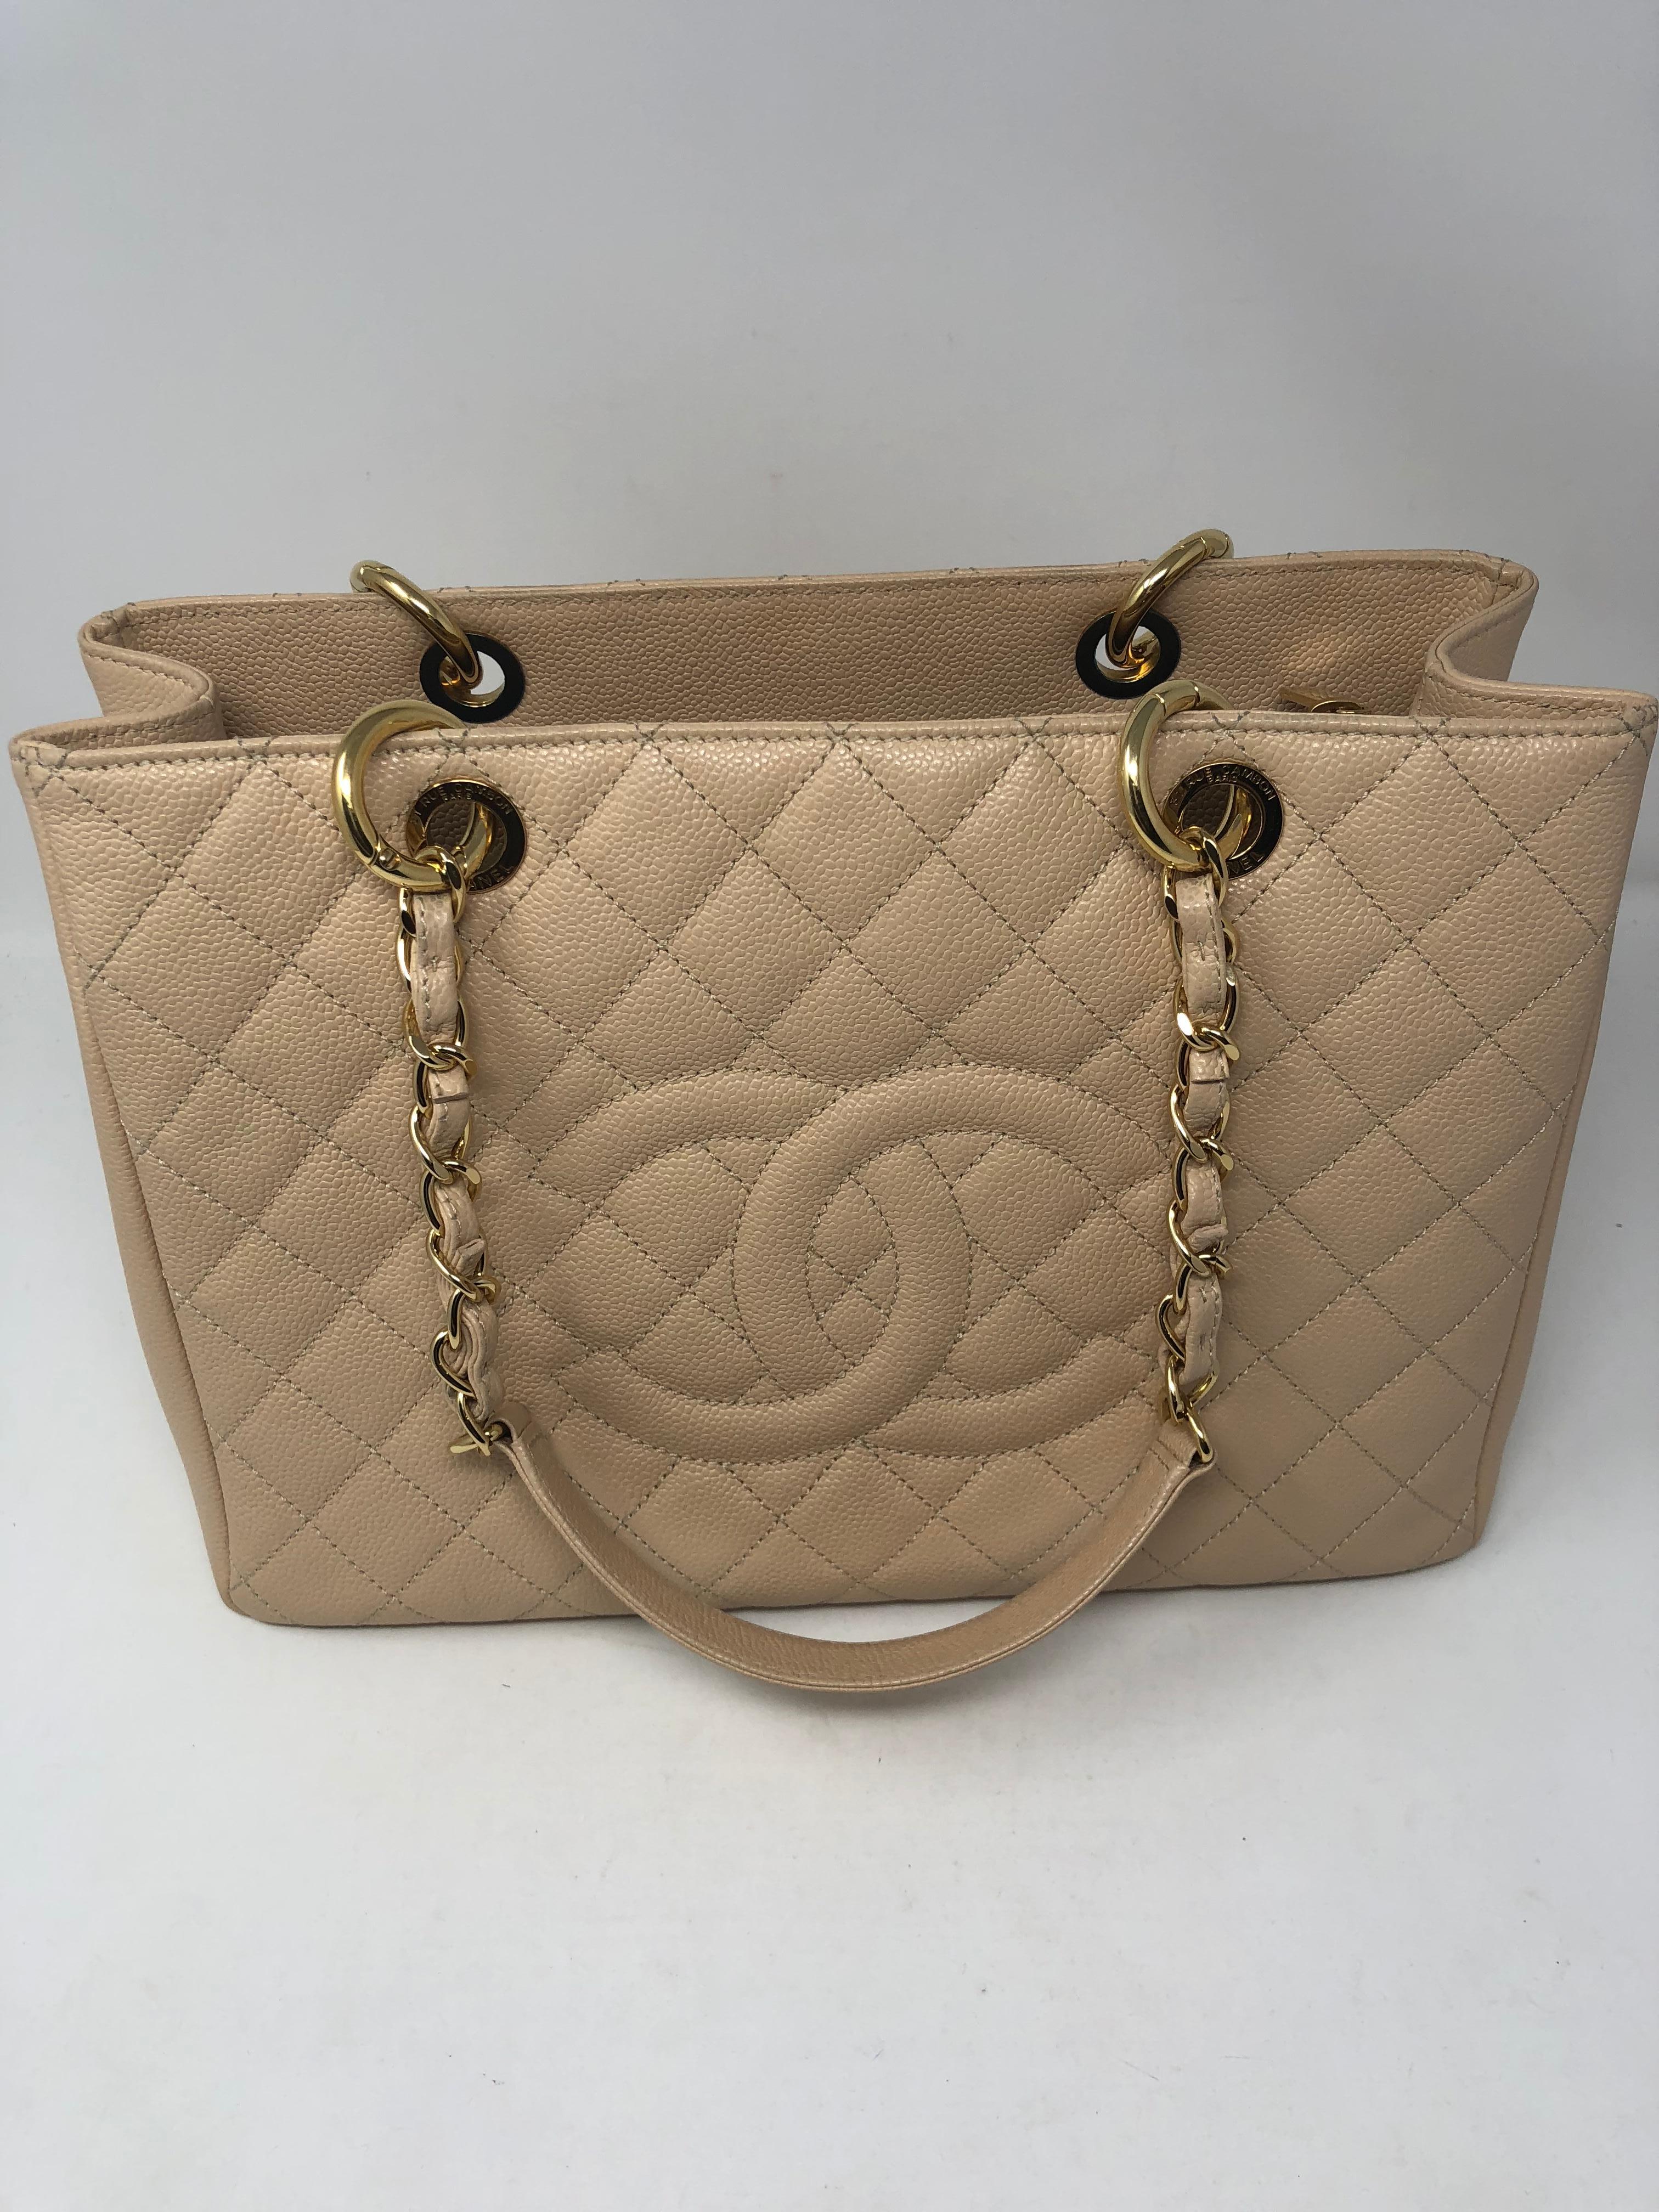 Chanel Cream Grand Shopper Tote in Caviar leather. Beautiful cream color with gold hardware. The GST's are now discontinued from Chanel. A great every day bag that will hold all your essentials. Caviar leather is durable and lasting. Scratch